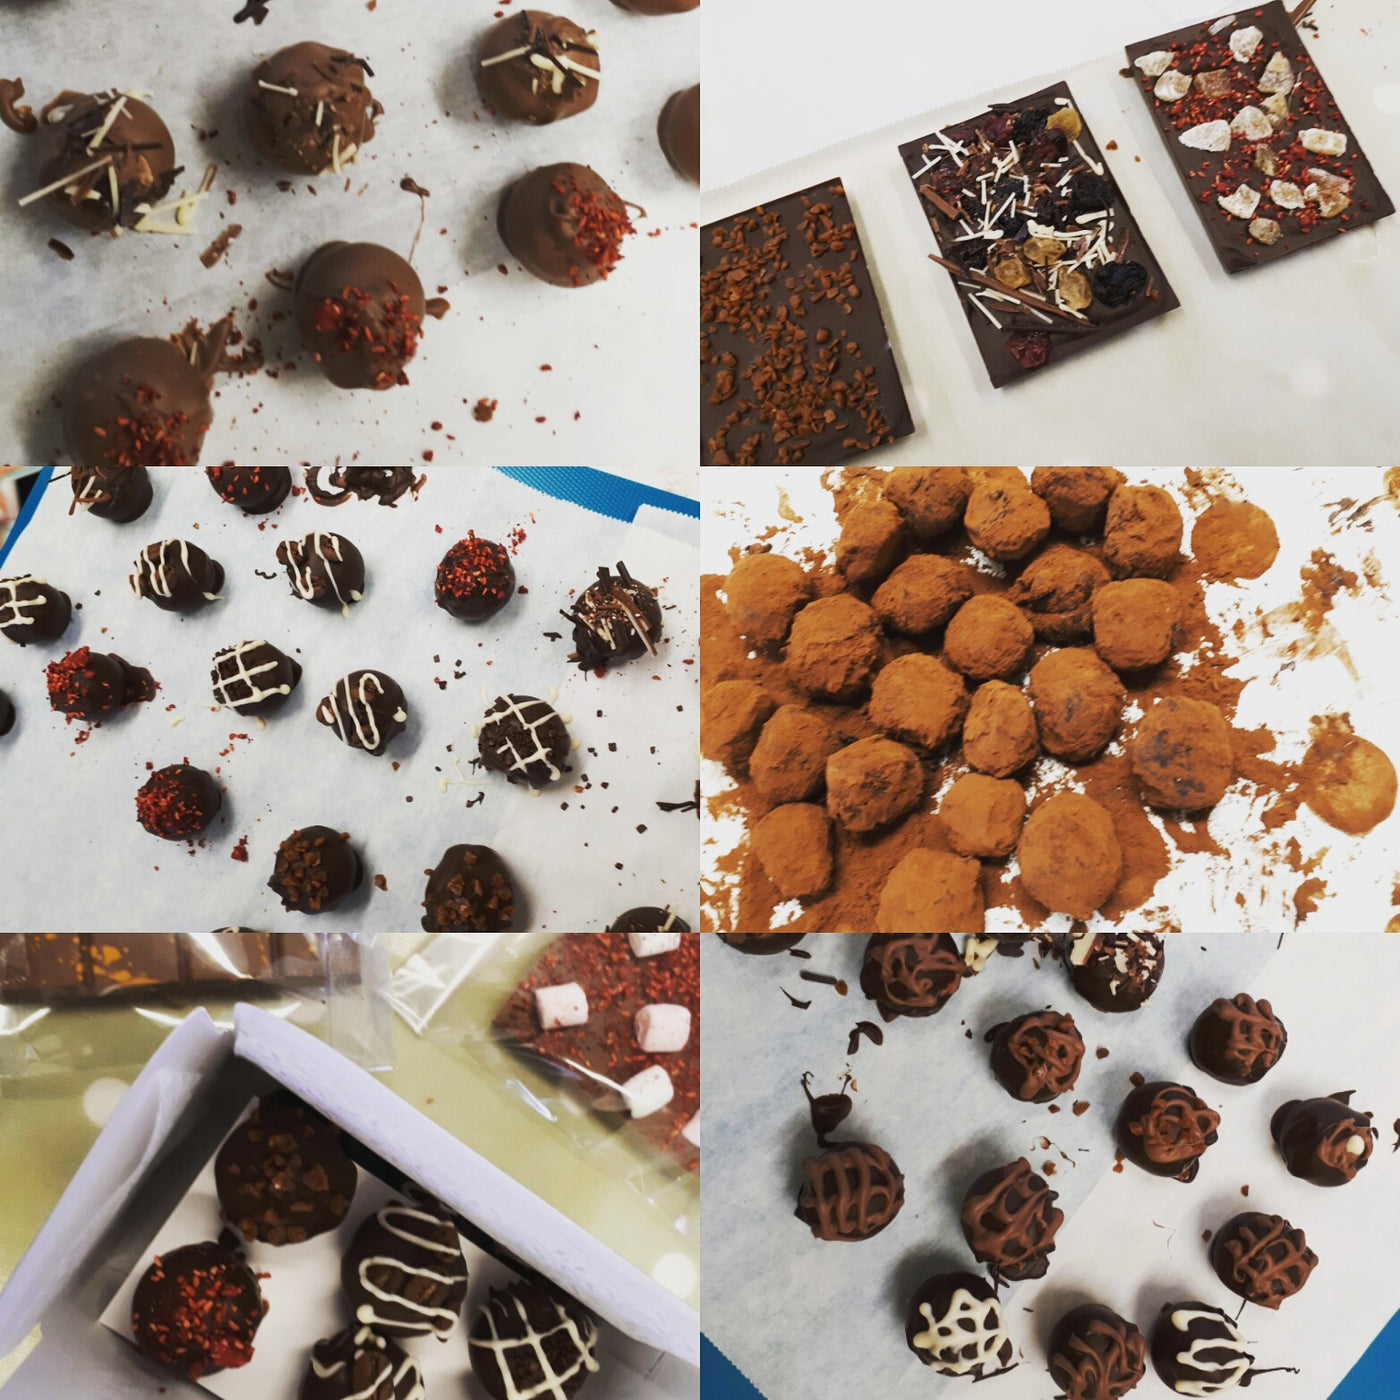 Collage of 6 photos - various chocolates and tablettes piped, dusted and sprinkled with different toppings